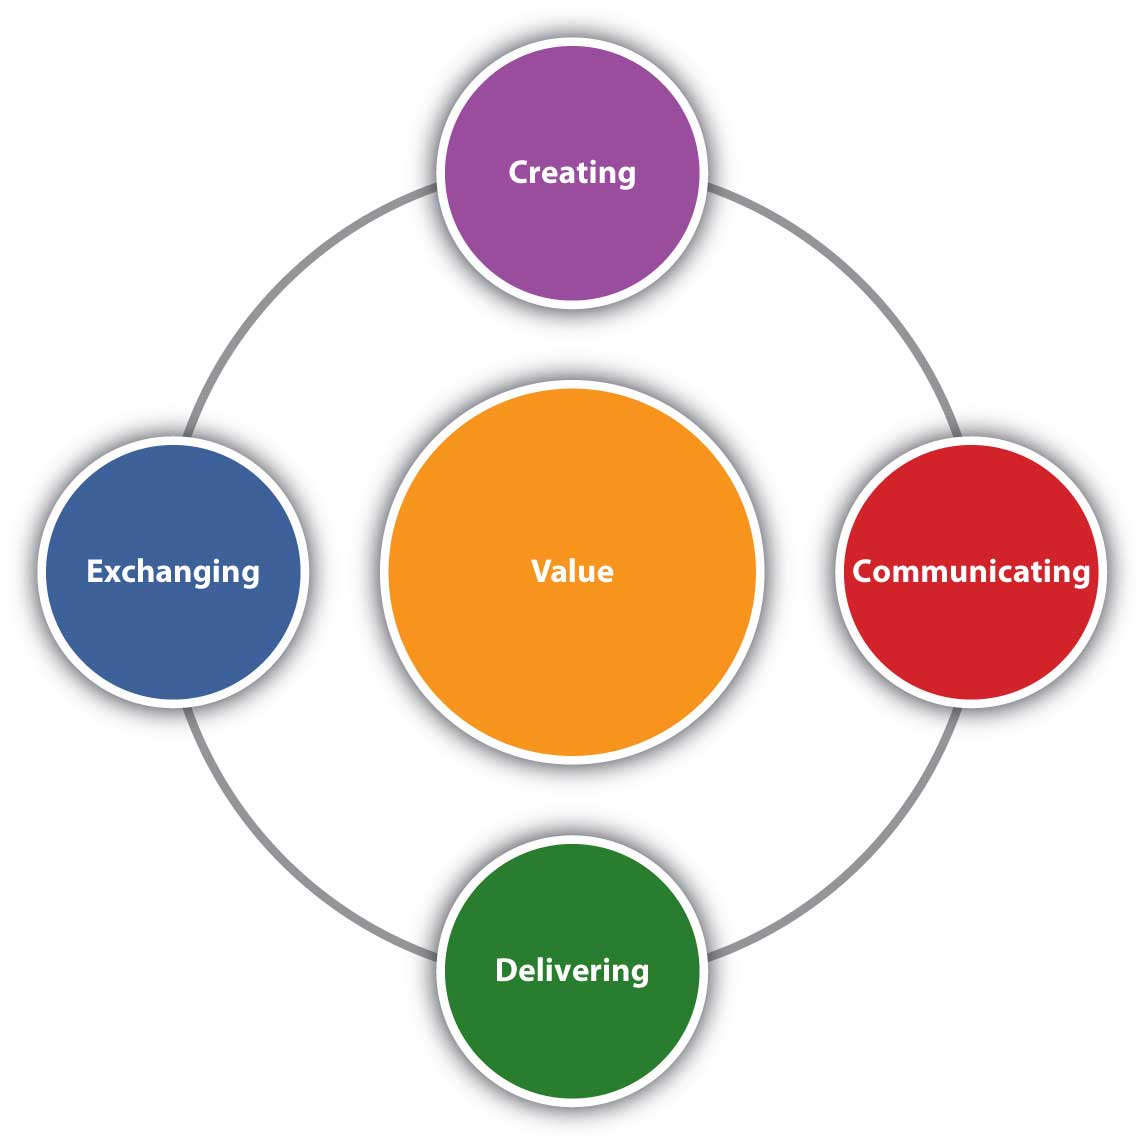 A diagram. Value is in the middle. It is surrounded by four circles labelled: Creating, communicating, delivering, and exchanging.